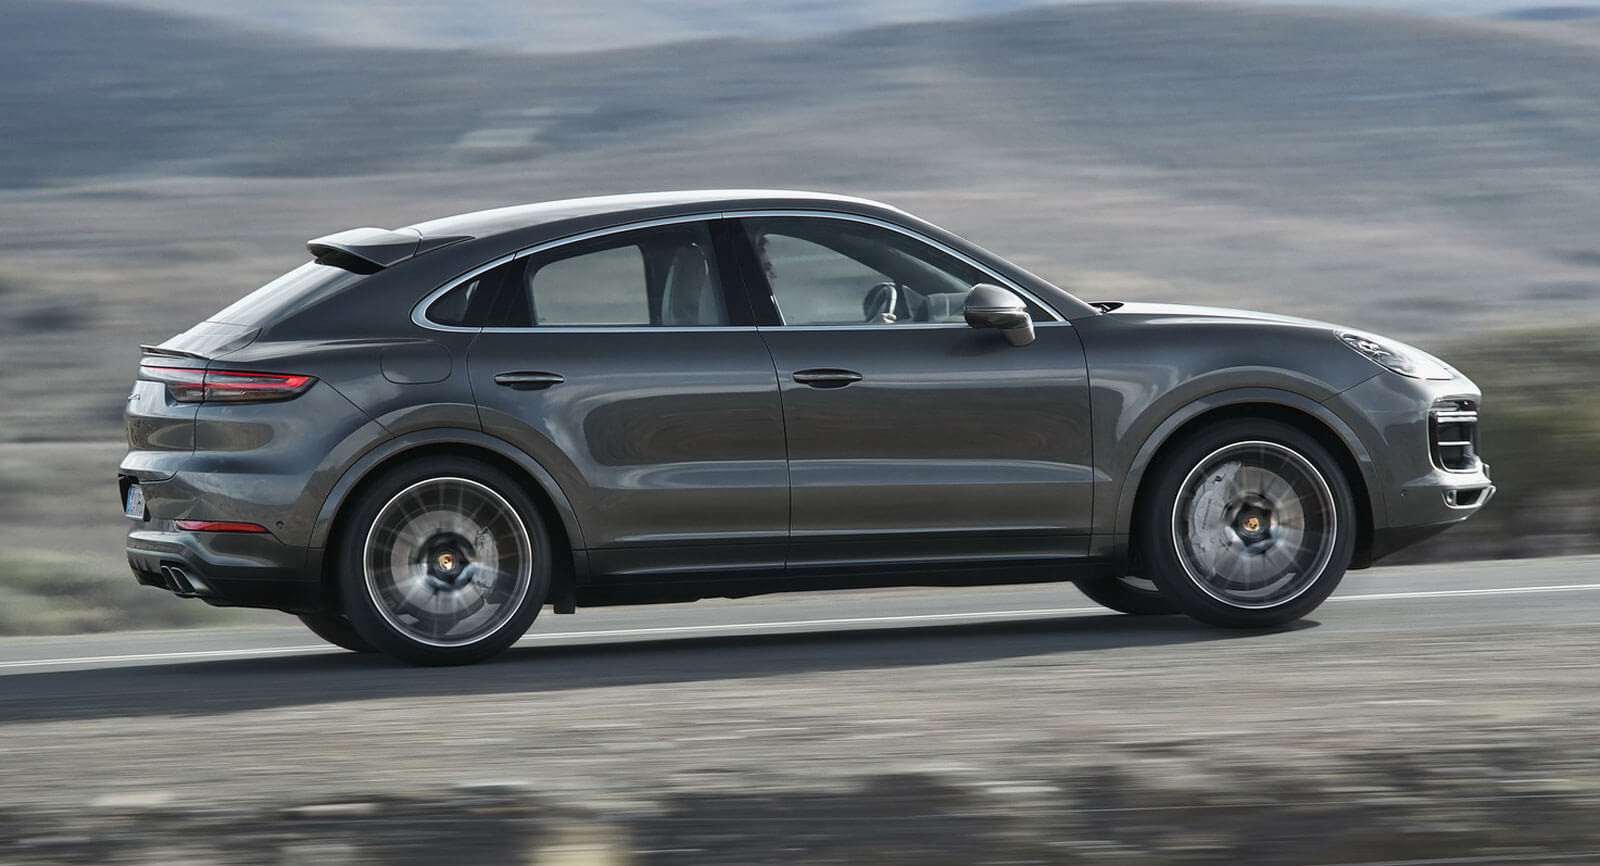 Porsche Cayenne Coupe With Lamborghini Urus V8 Said To Be In The Works |  Carscoops